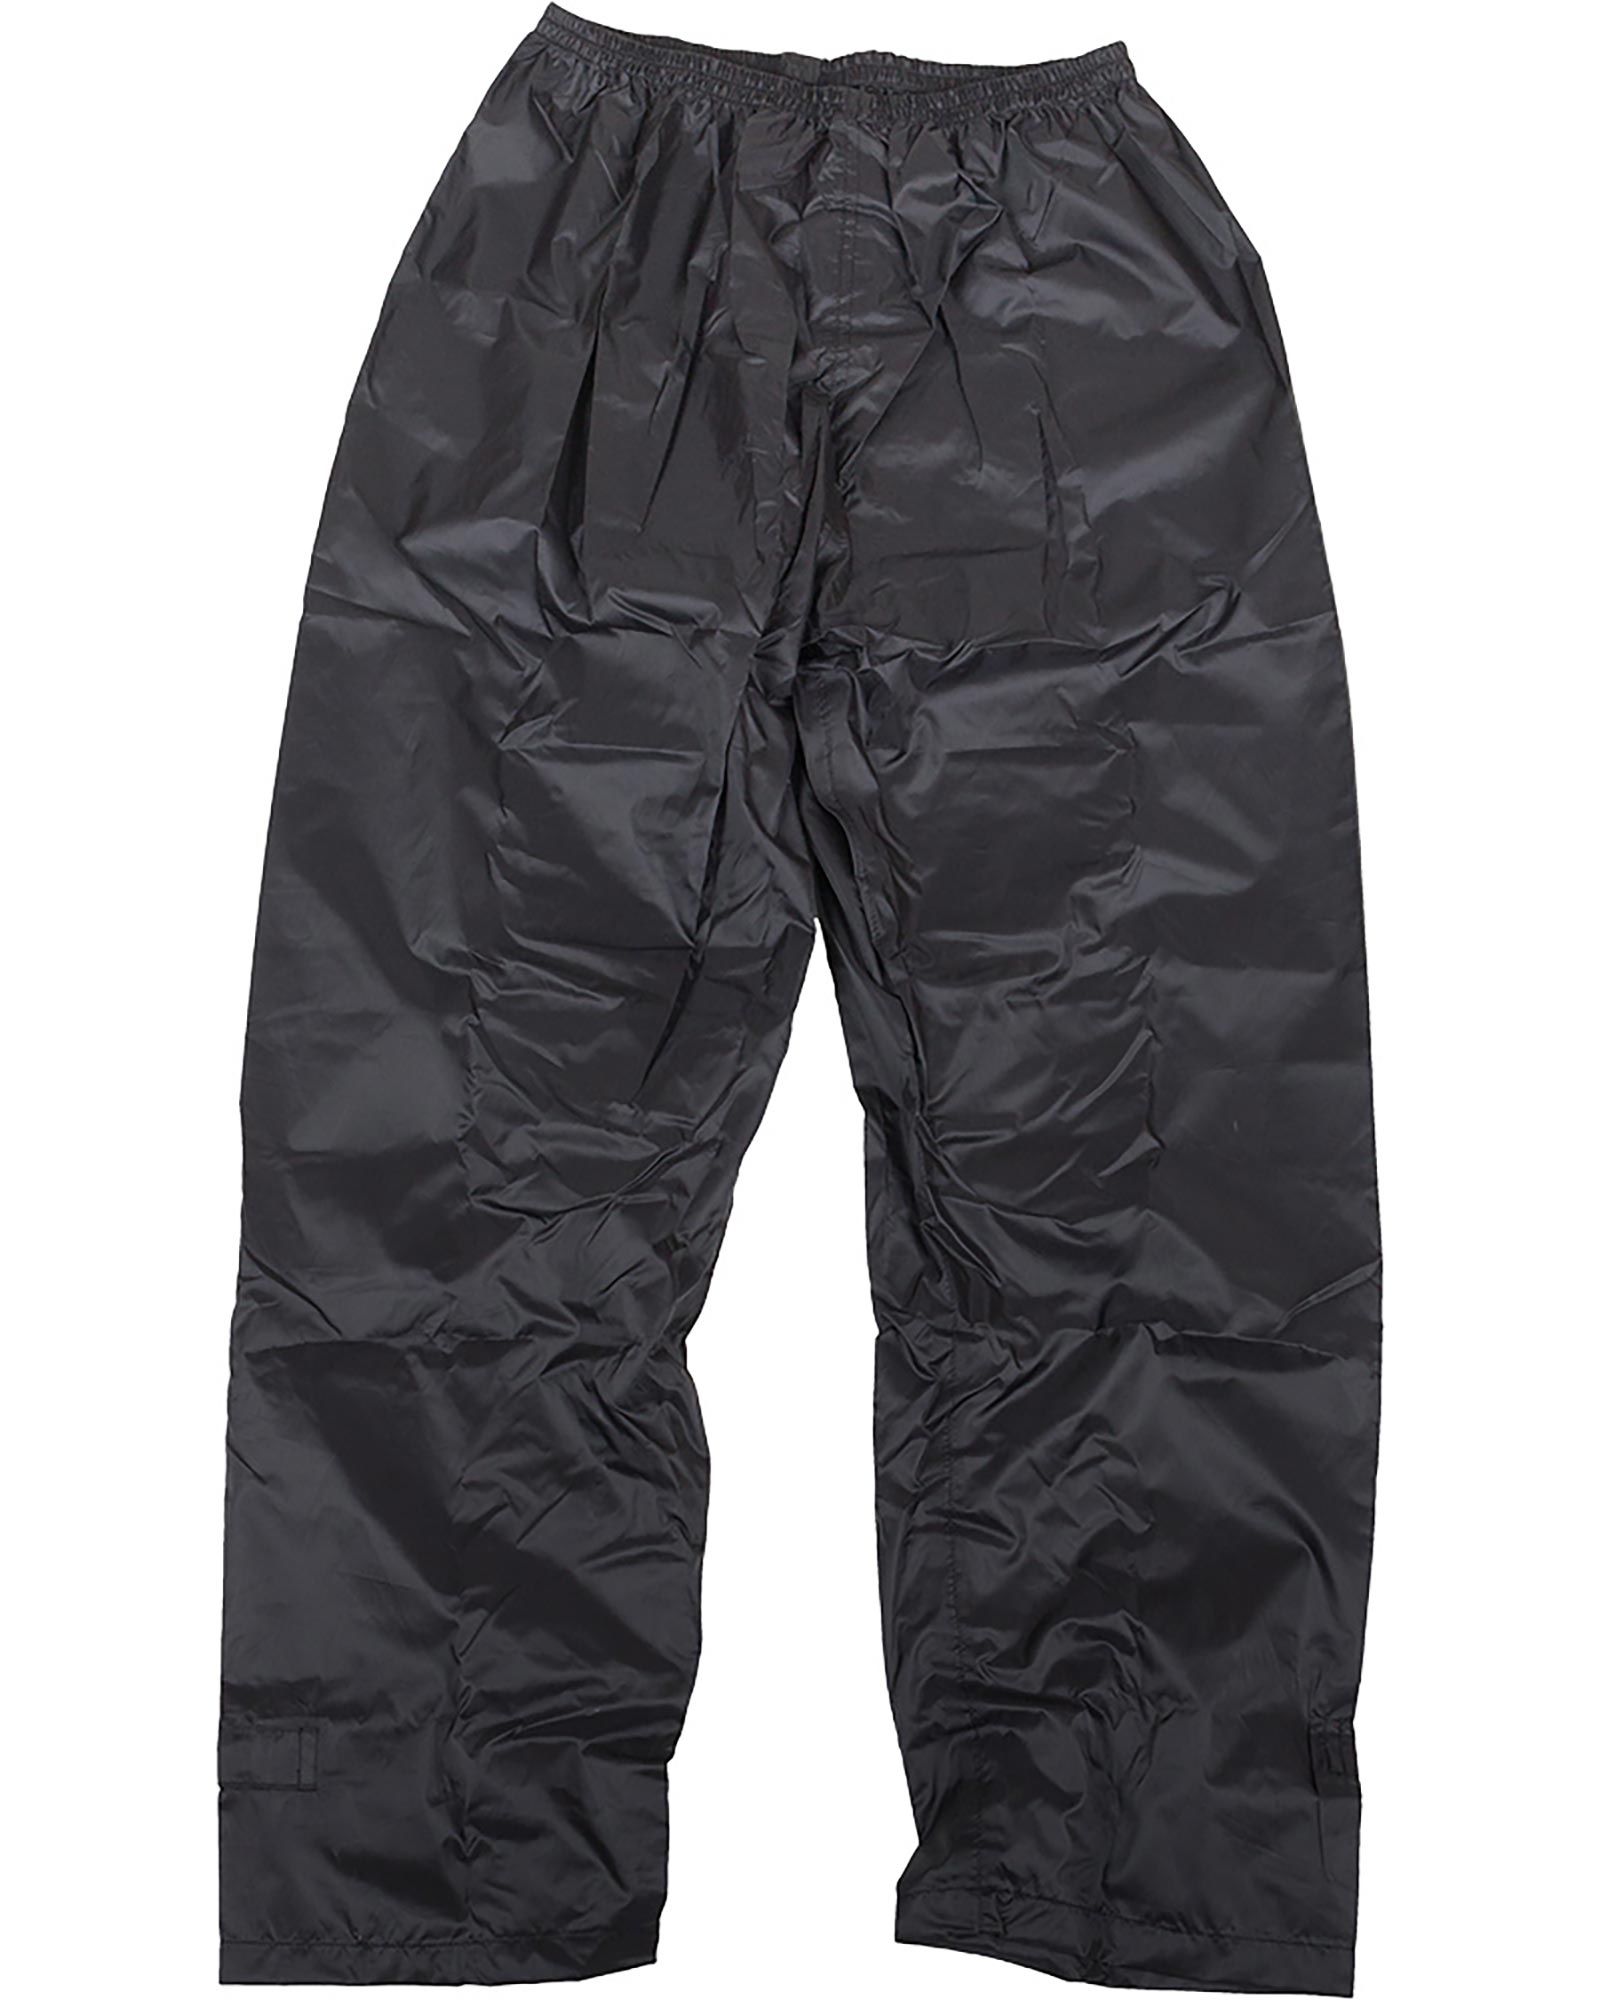 Target Dry Mac in a Sac Adult Packable Waterproof Overtrousers - black XS